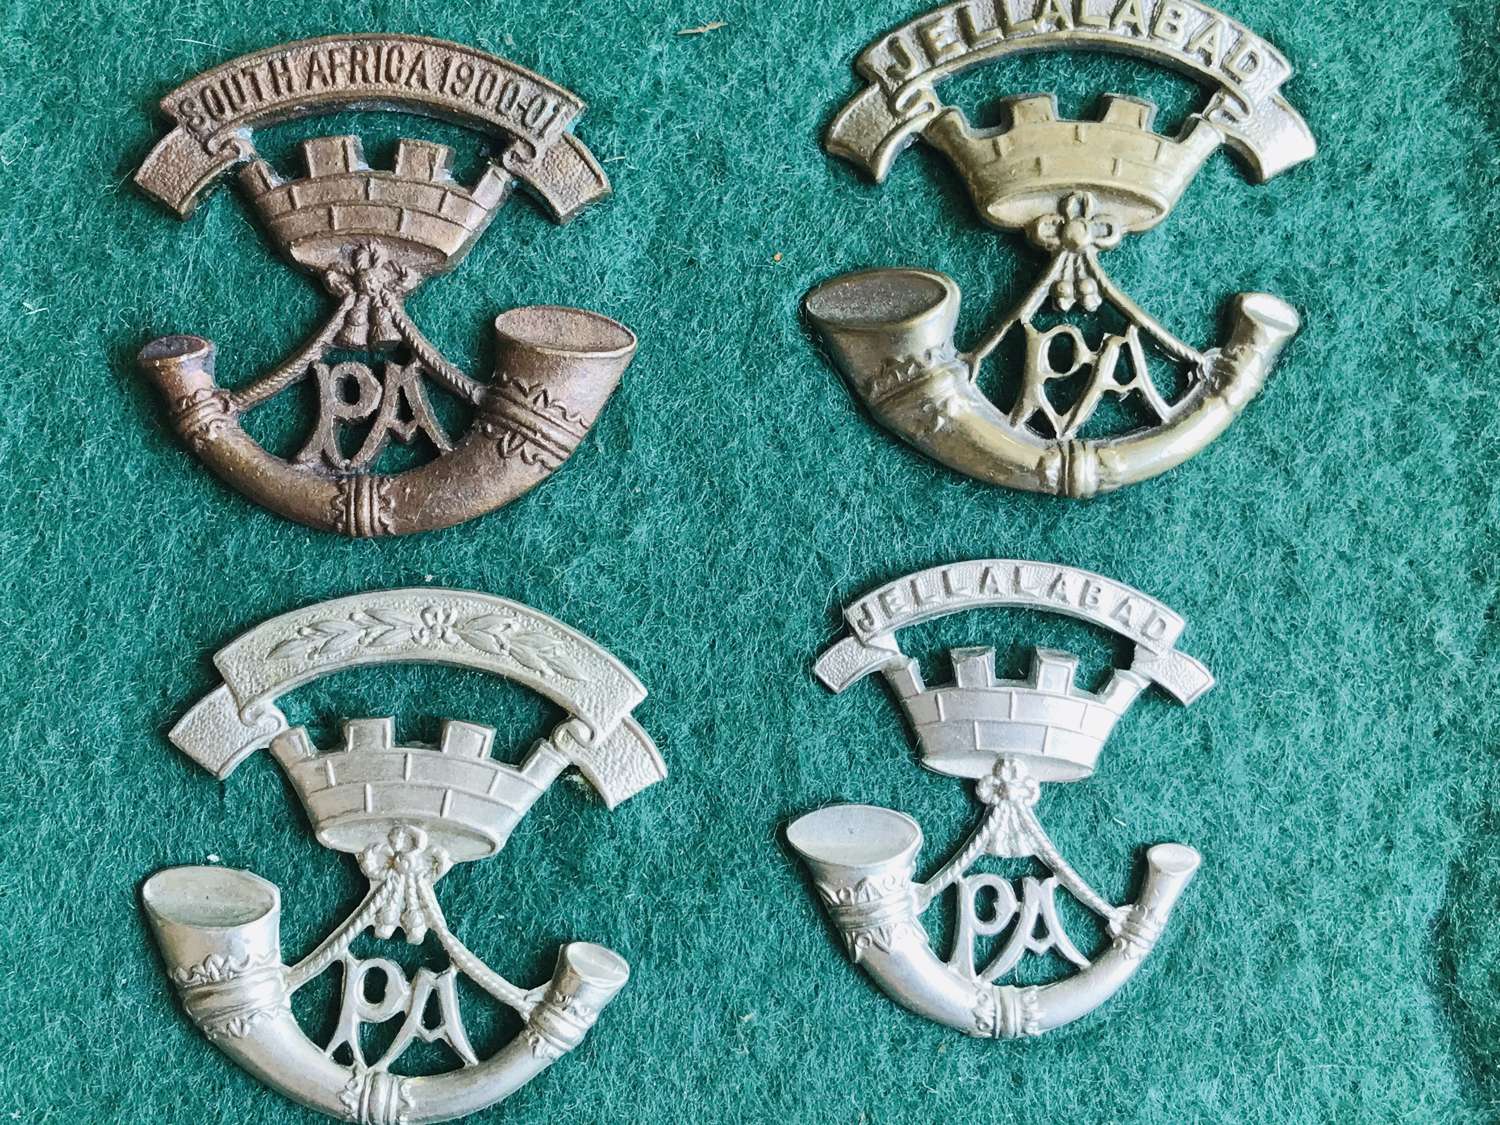 A collection of 12 Somerset light infantry cap badges